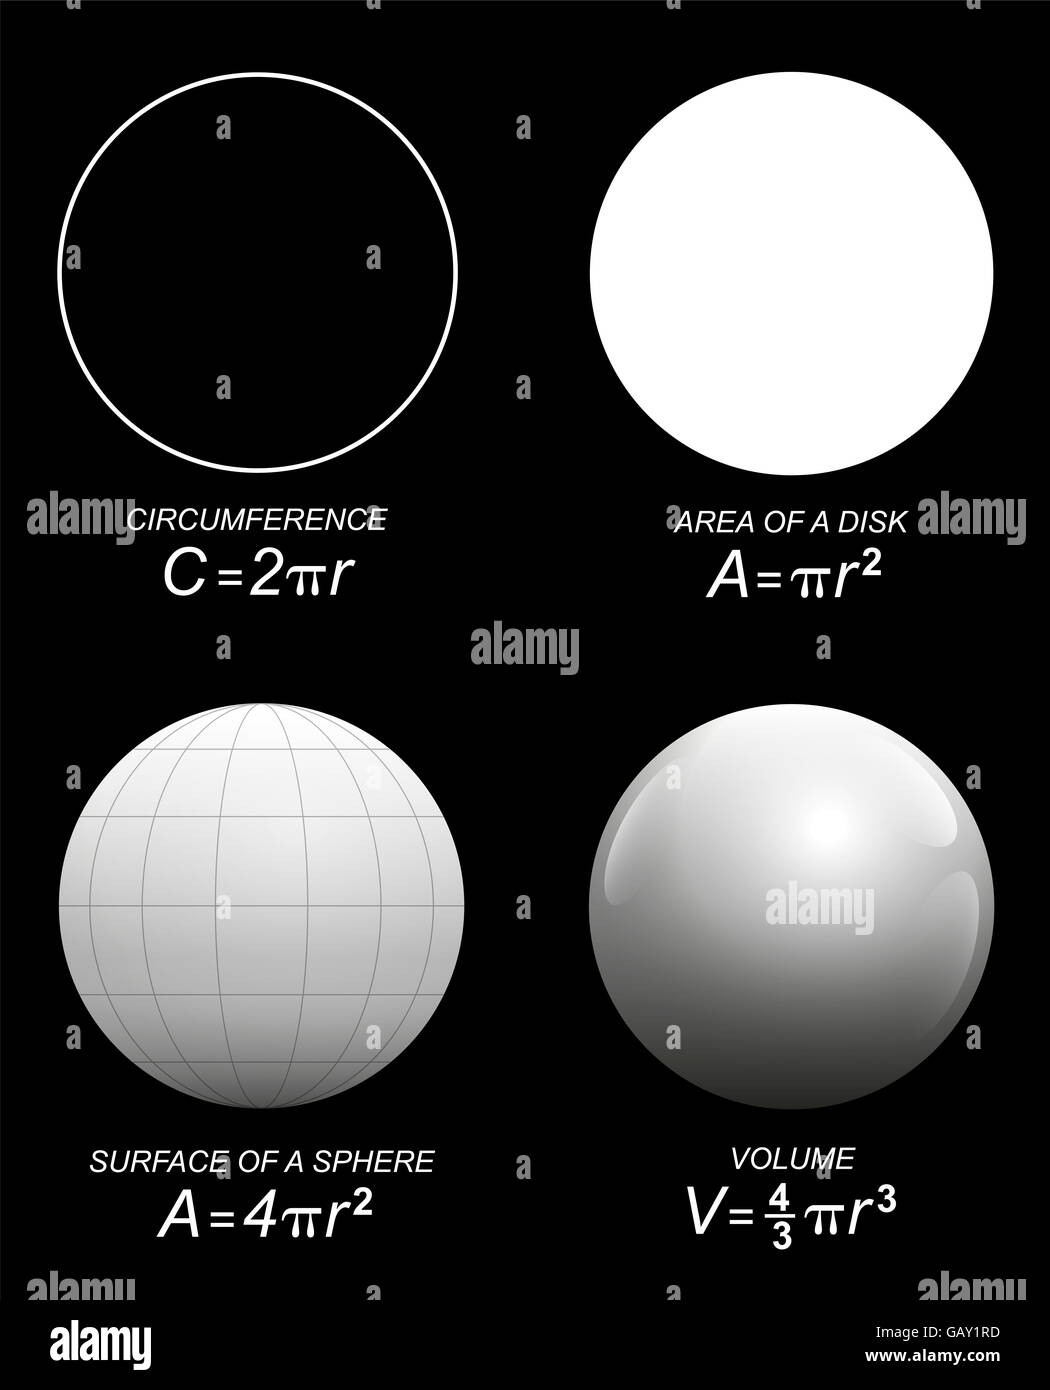 Circumference, area of a disk, surface and volume of a sphere - mathematical formulas. Stock Photo